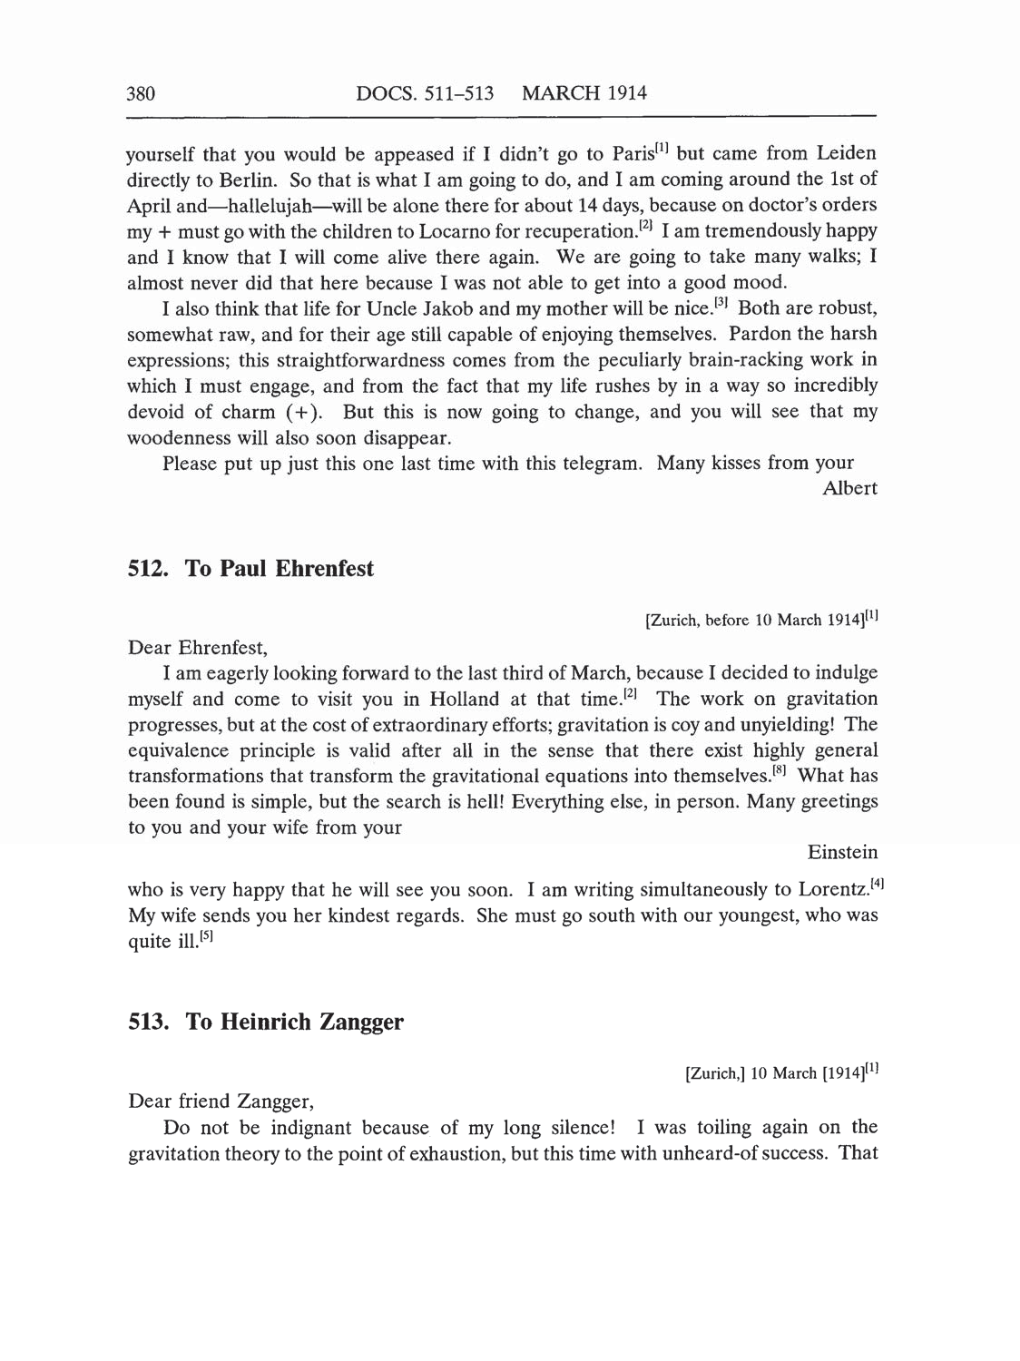 Volume 5: The Swiss Years: Correspondence, 1902-1914 (English translation supplement) page 380